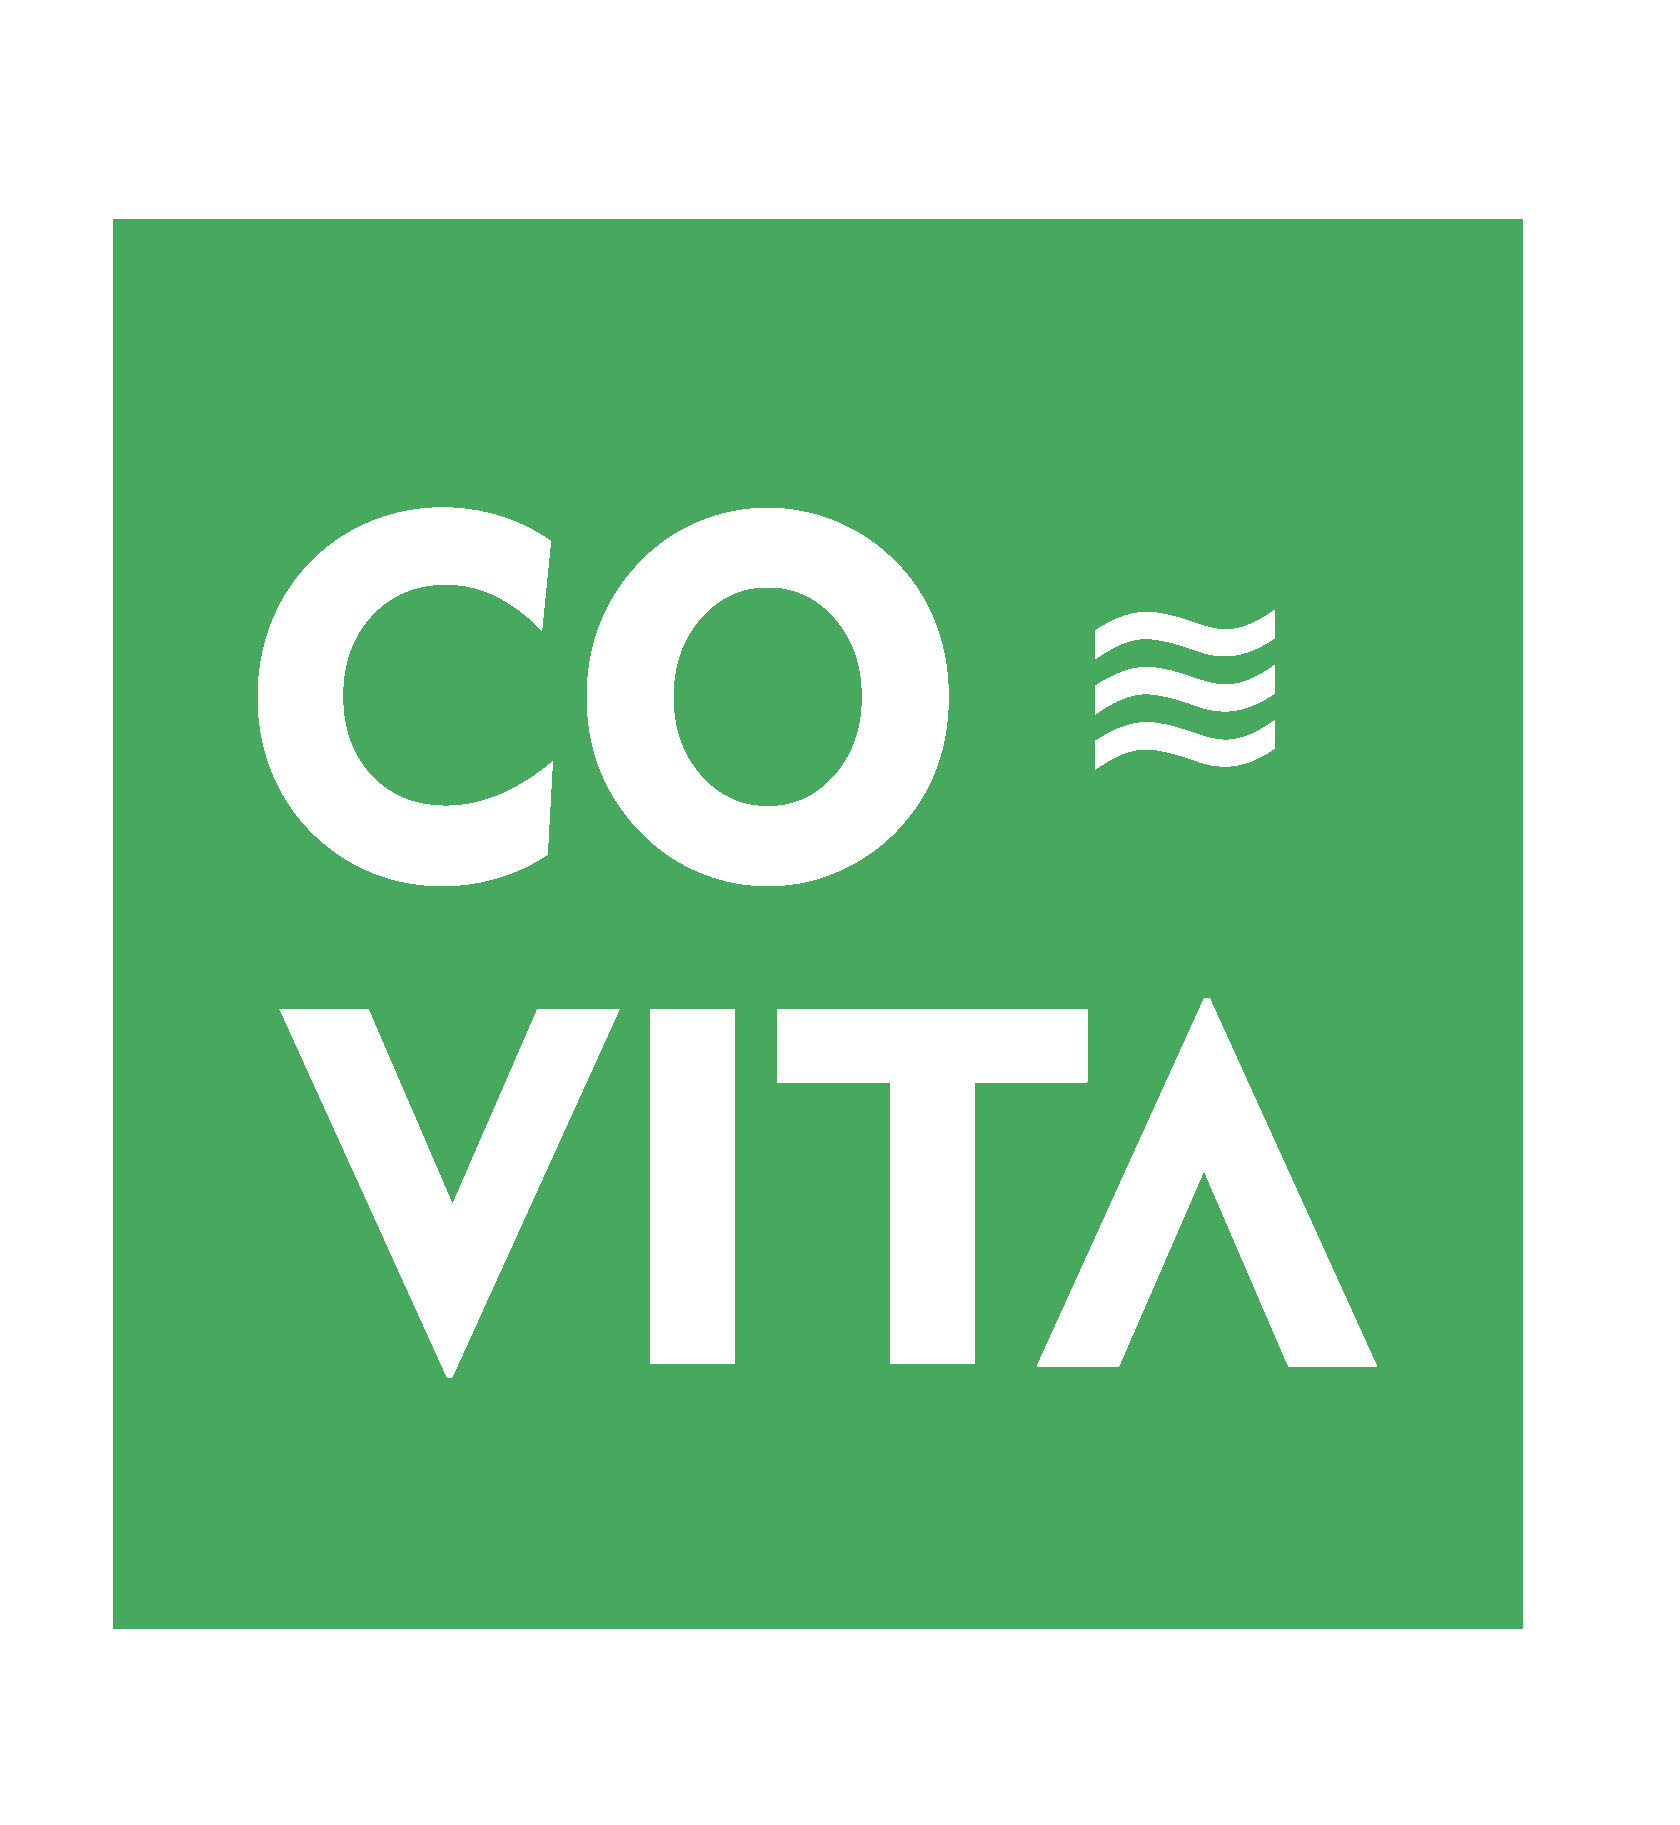 Fuel your life with Covita